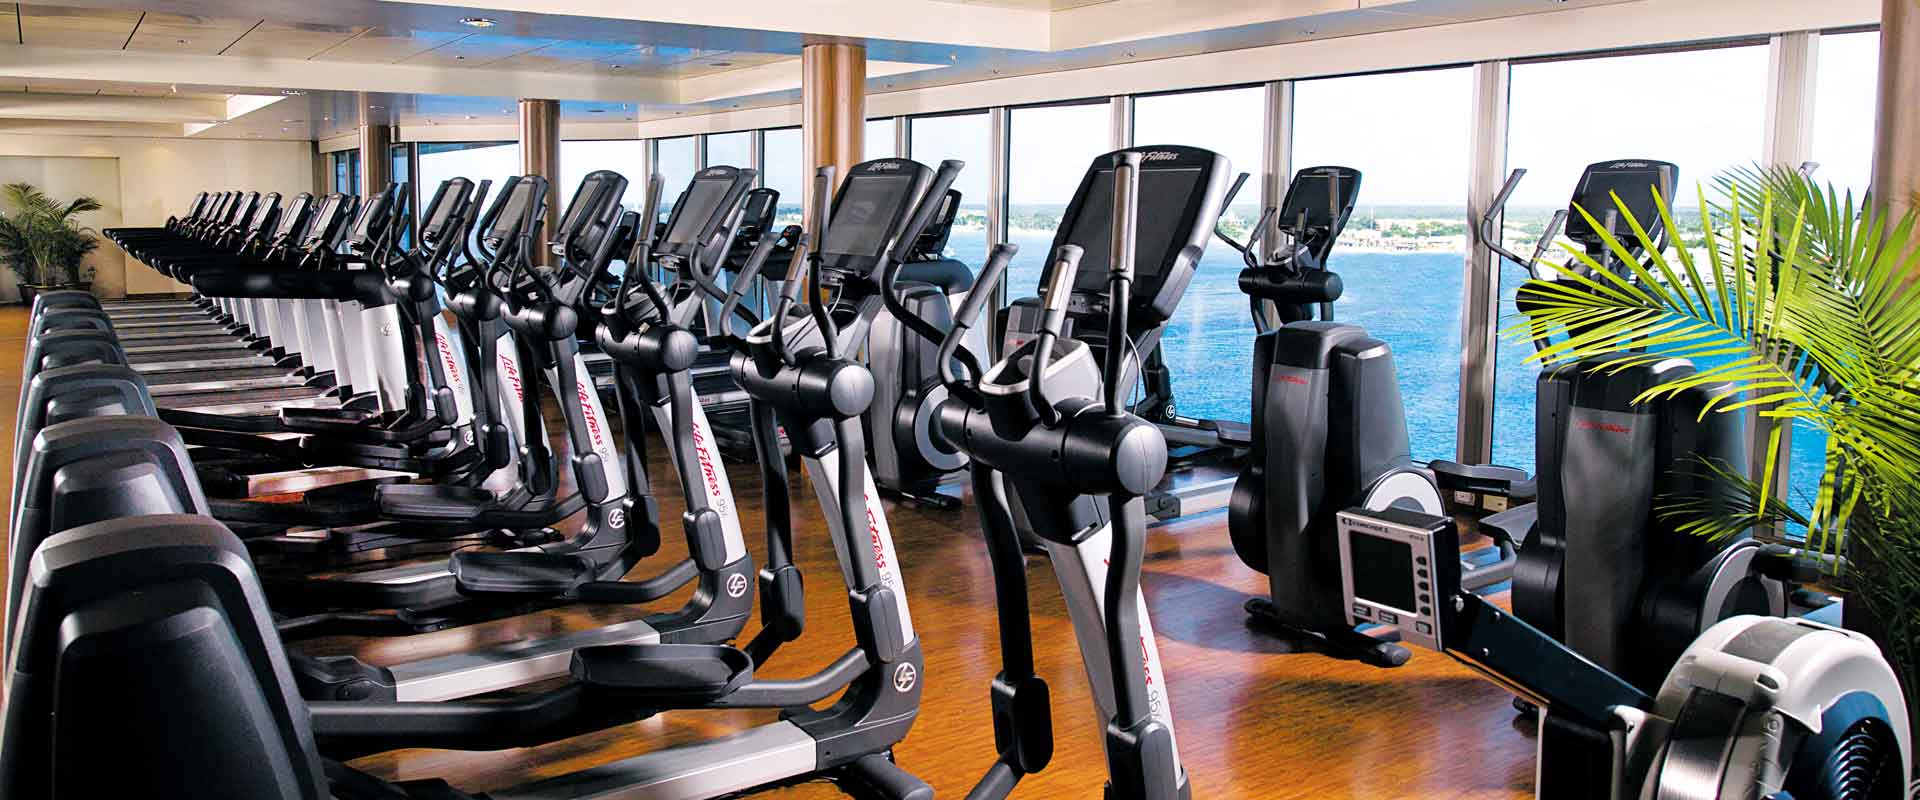 Gym and Fitness Equipment Leasing